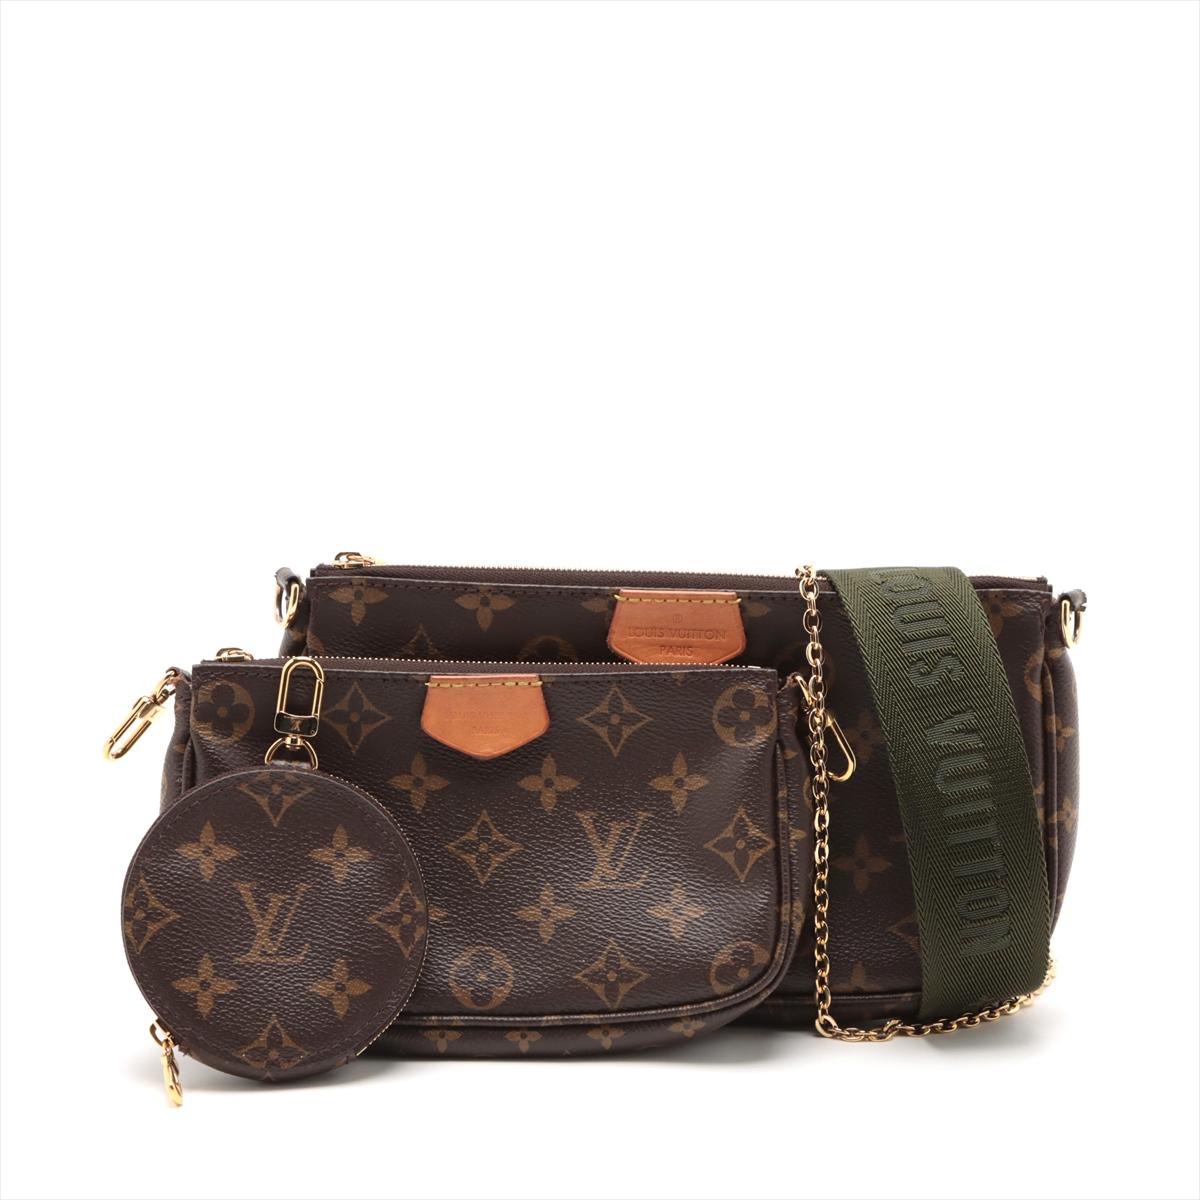 The Louis Vuitton Monogram Multi Pochette Accessoires is a versatile and stylish fashion accessory that combines the iconic Monogram canvas with a multi-compartment design. Crafted from Louis Vuitton's signature Monogram canvas, the bag features the